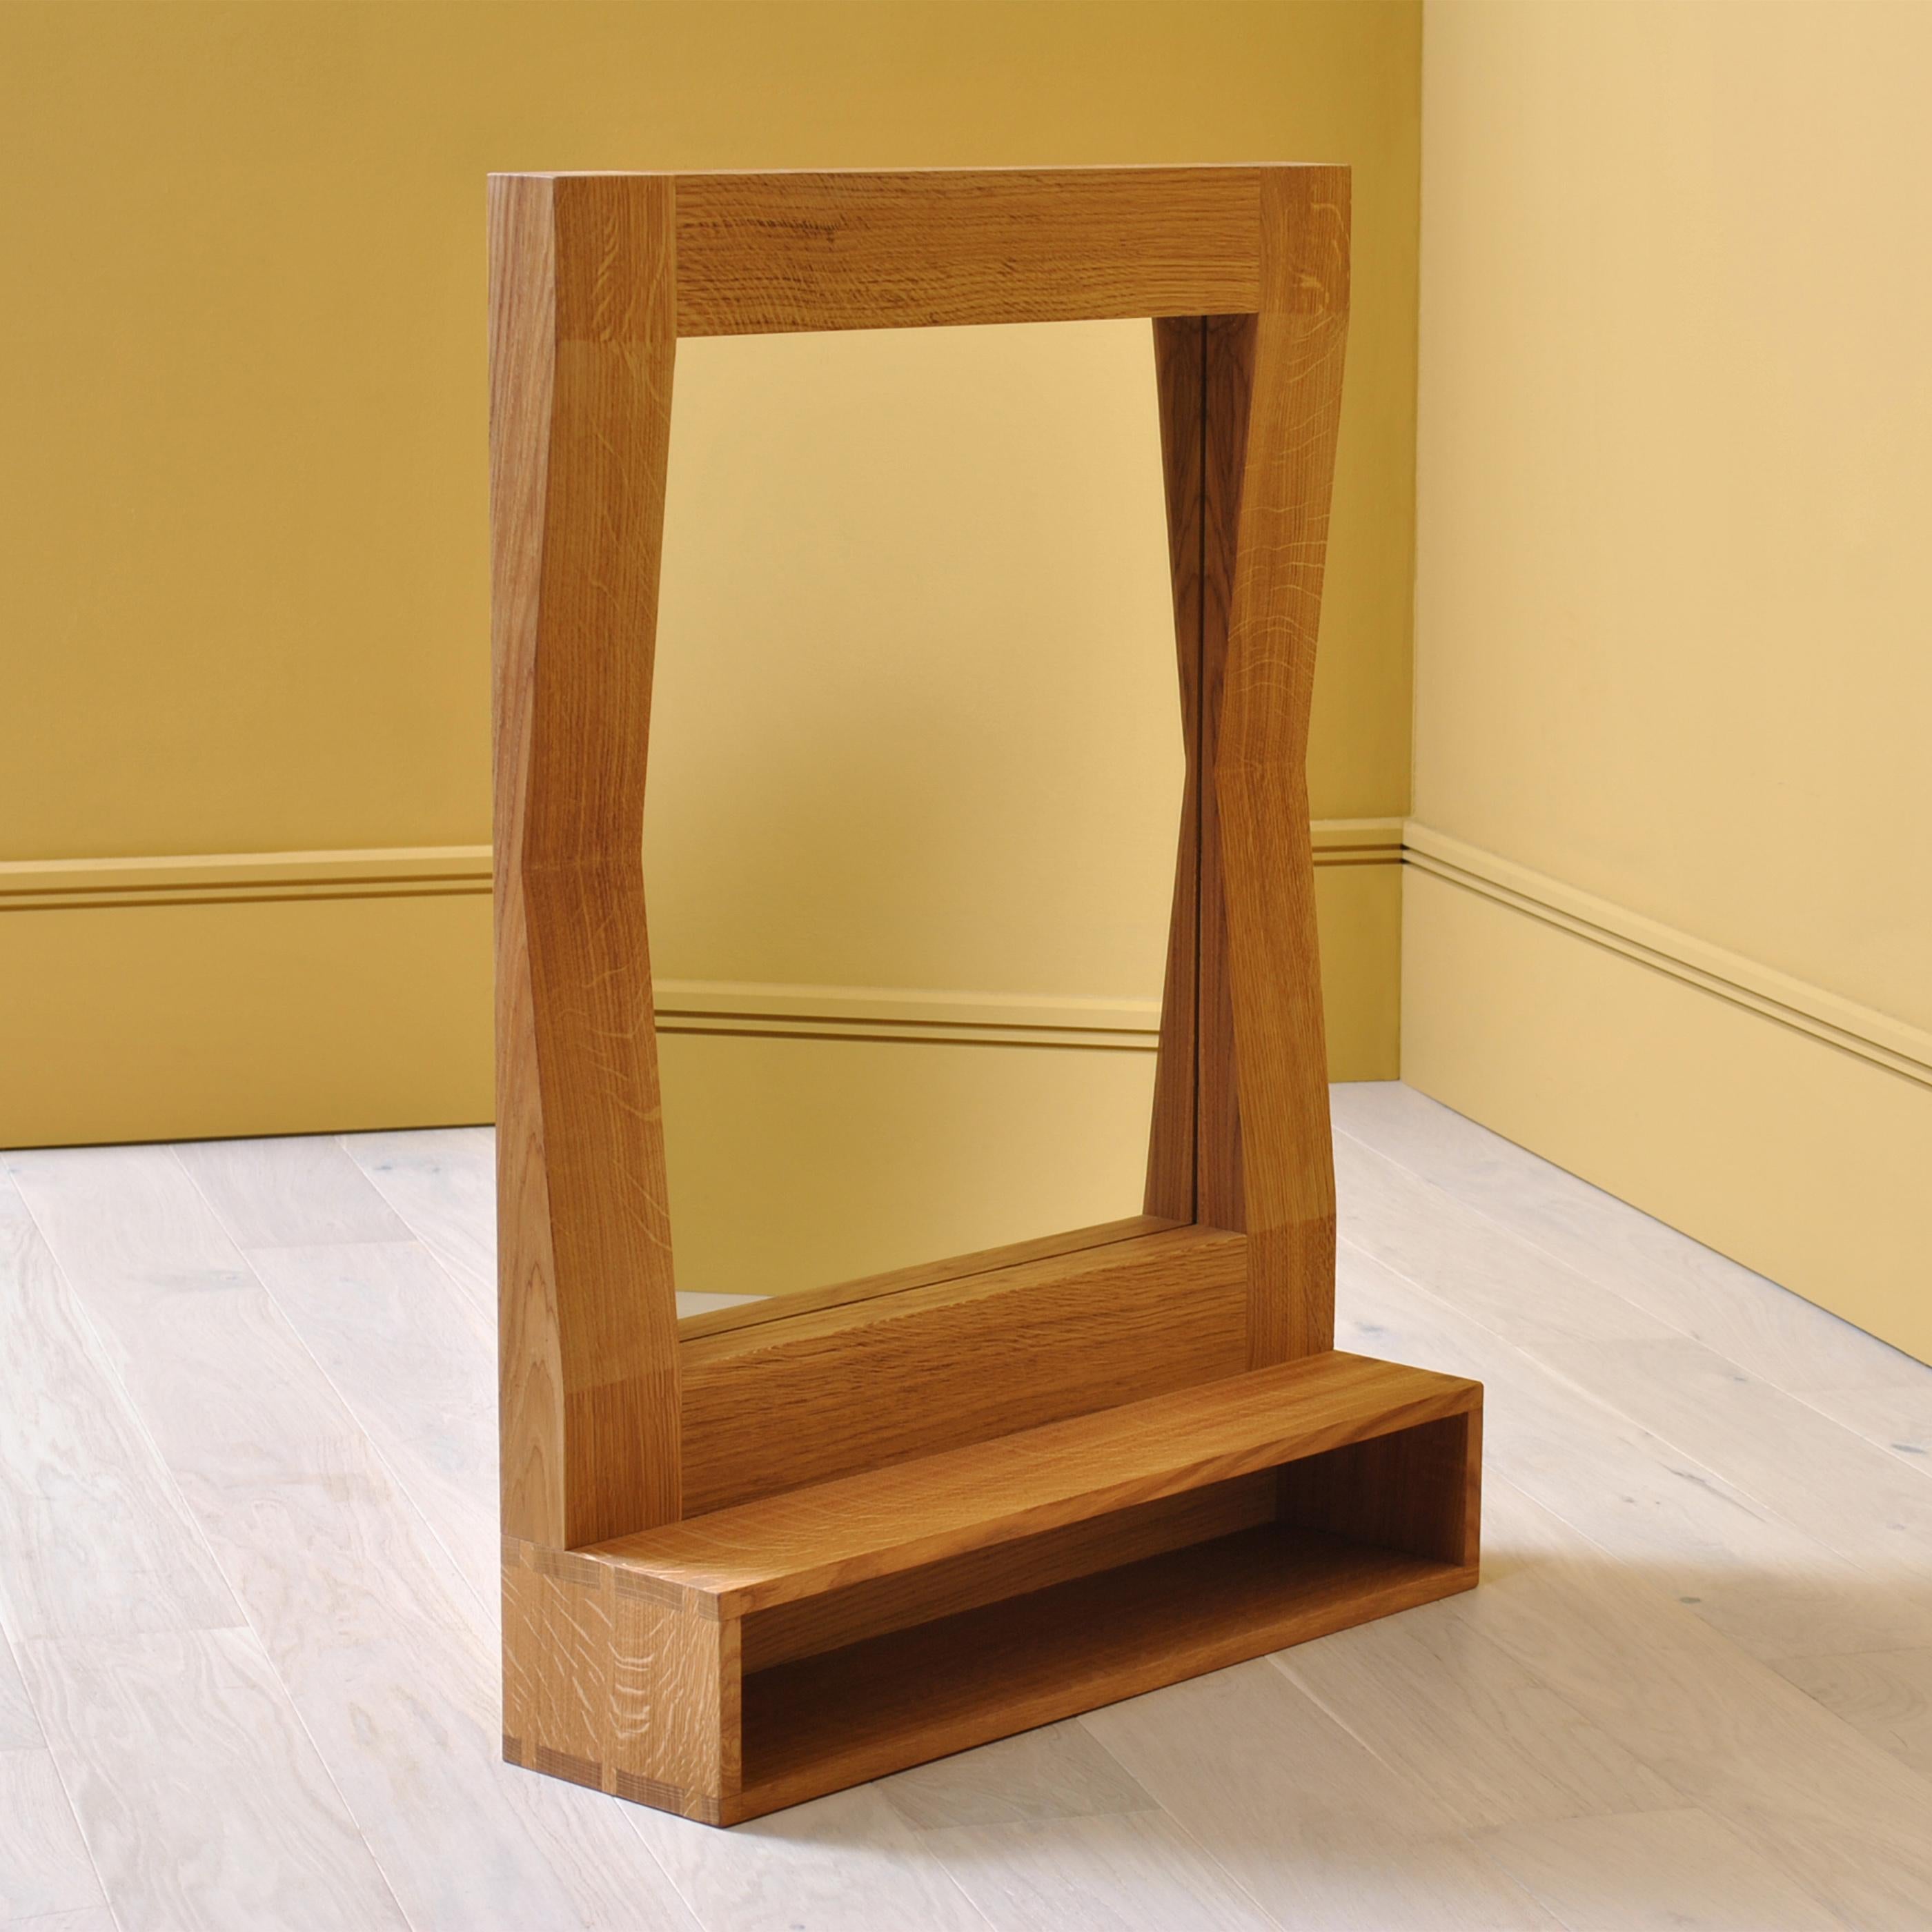 Hand-Crafted Large Handcrafted Oak Furrow Shelf Mirror